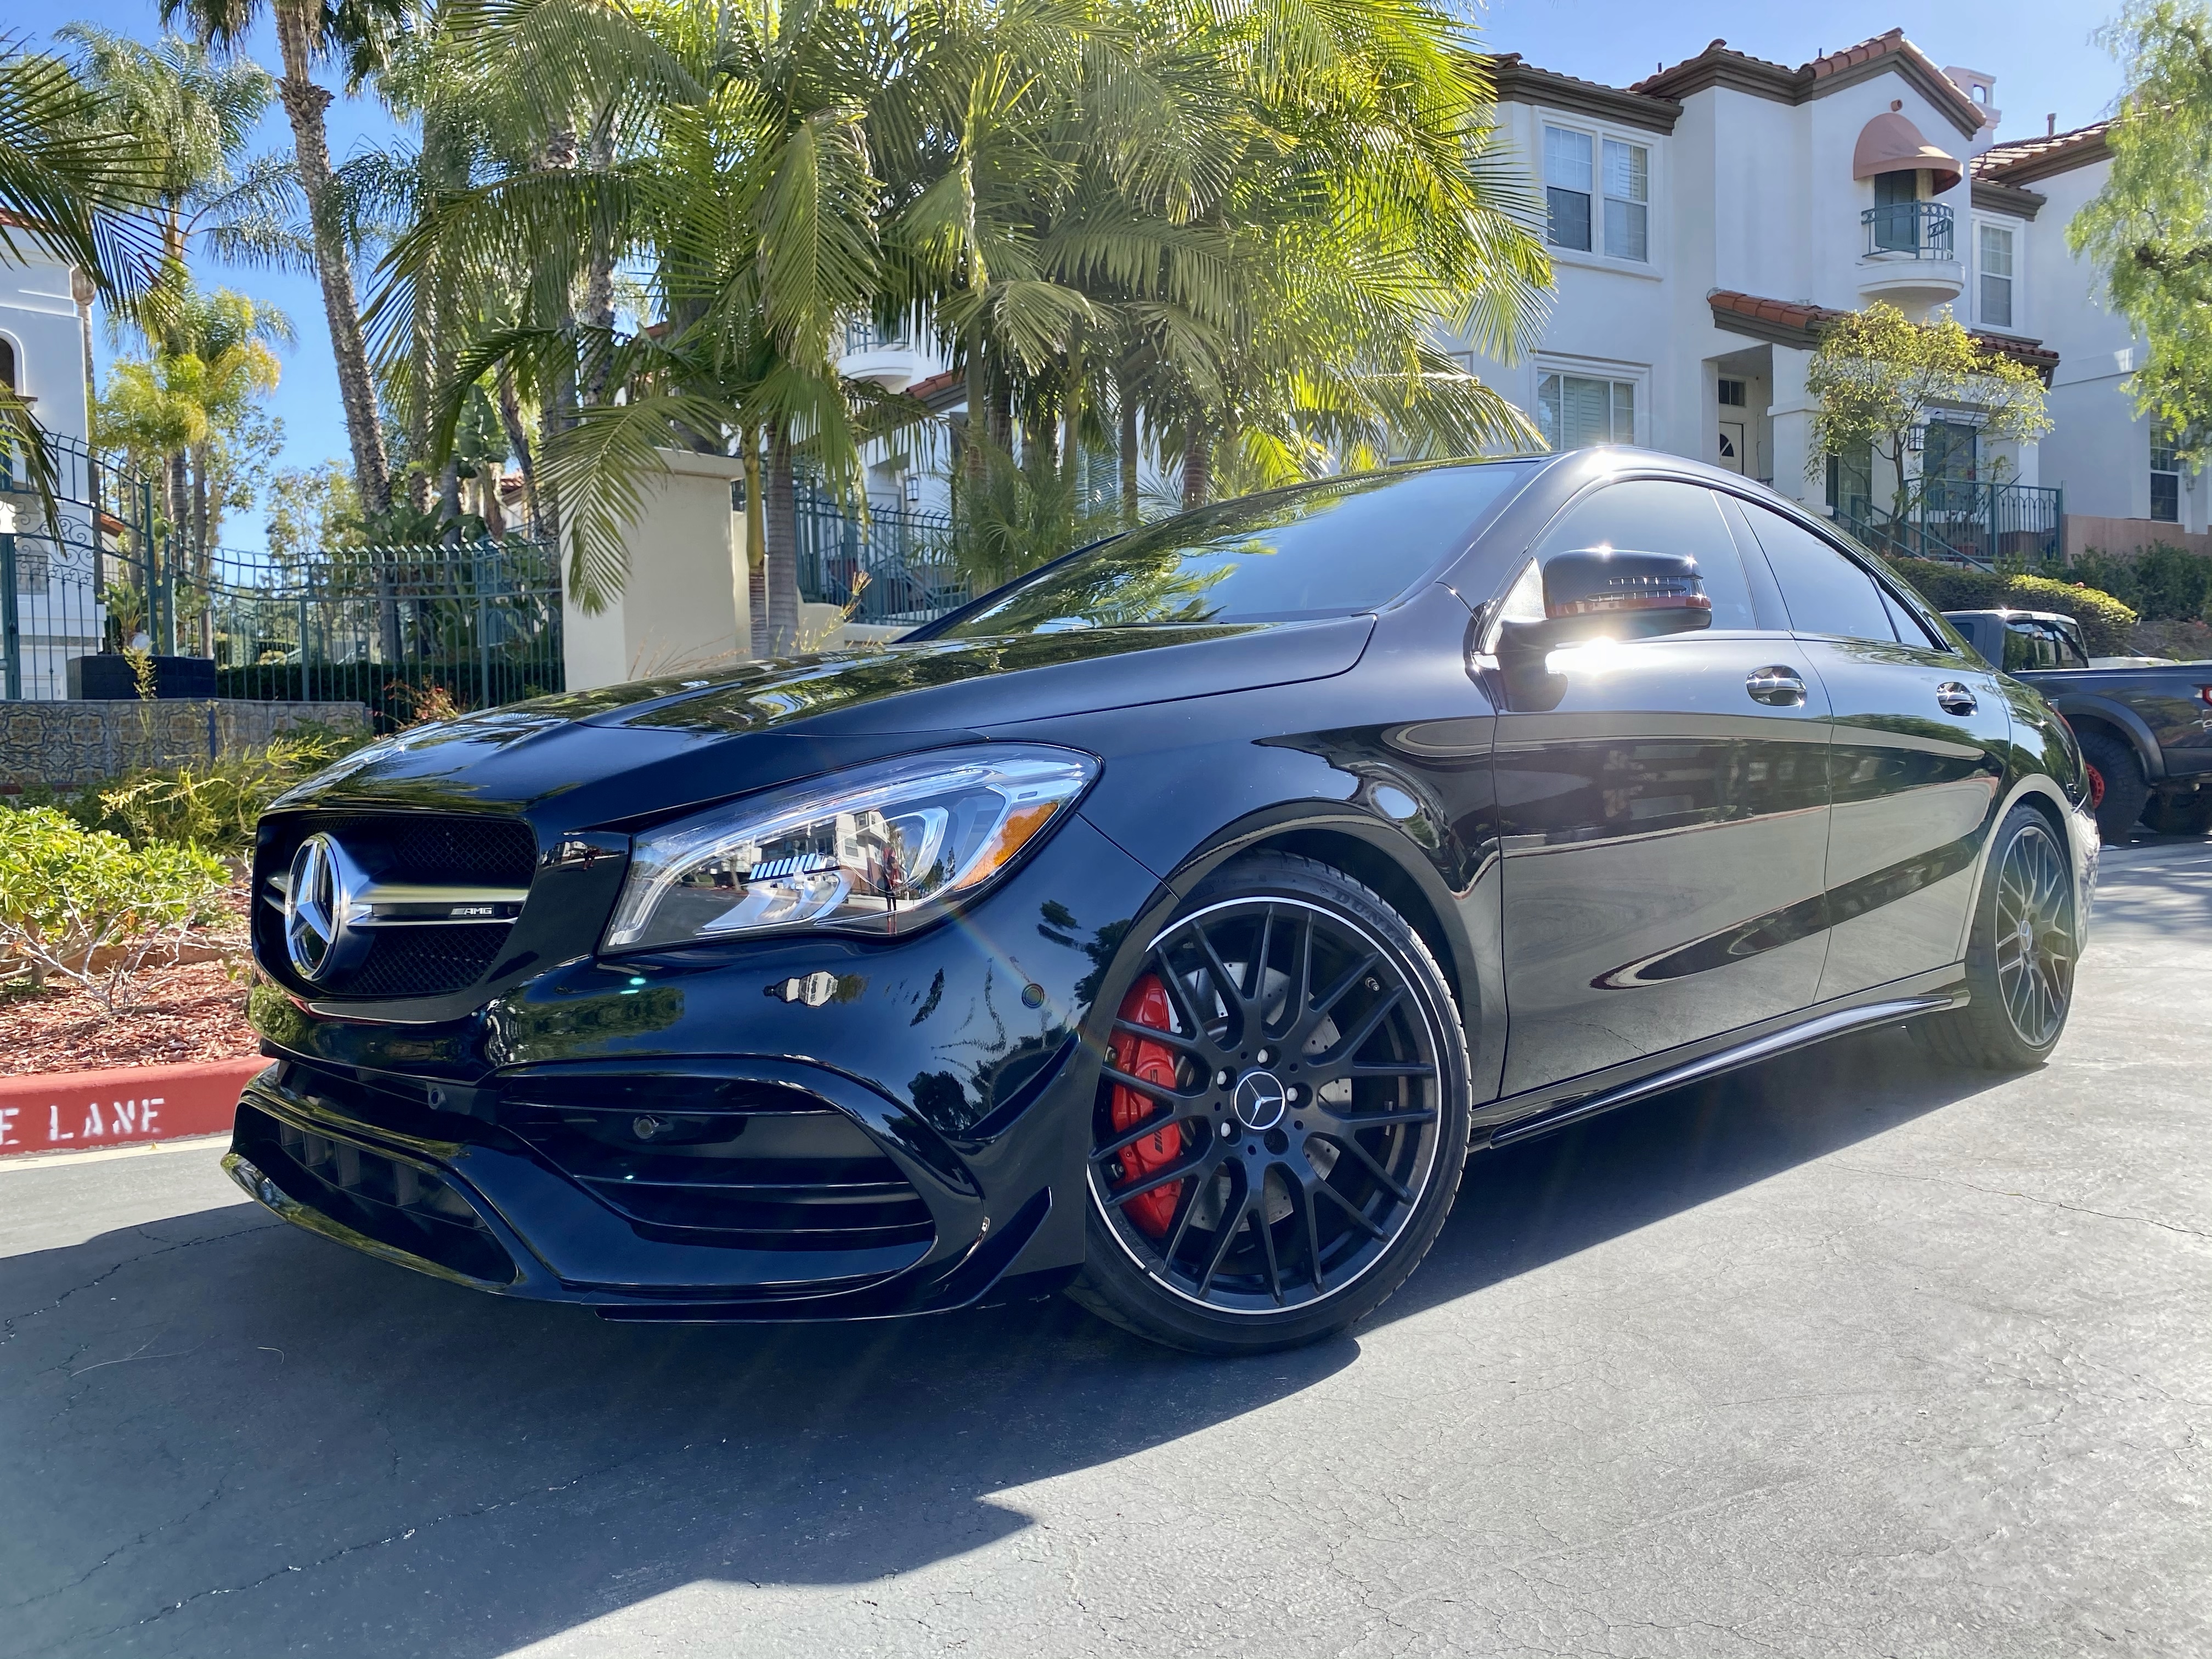 Used Mercedes-Benz CLA 45 AMG for Sale Right Now - Autotrader